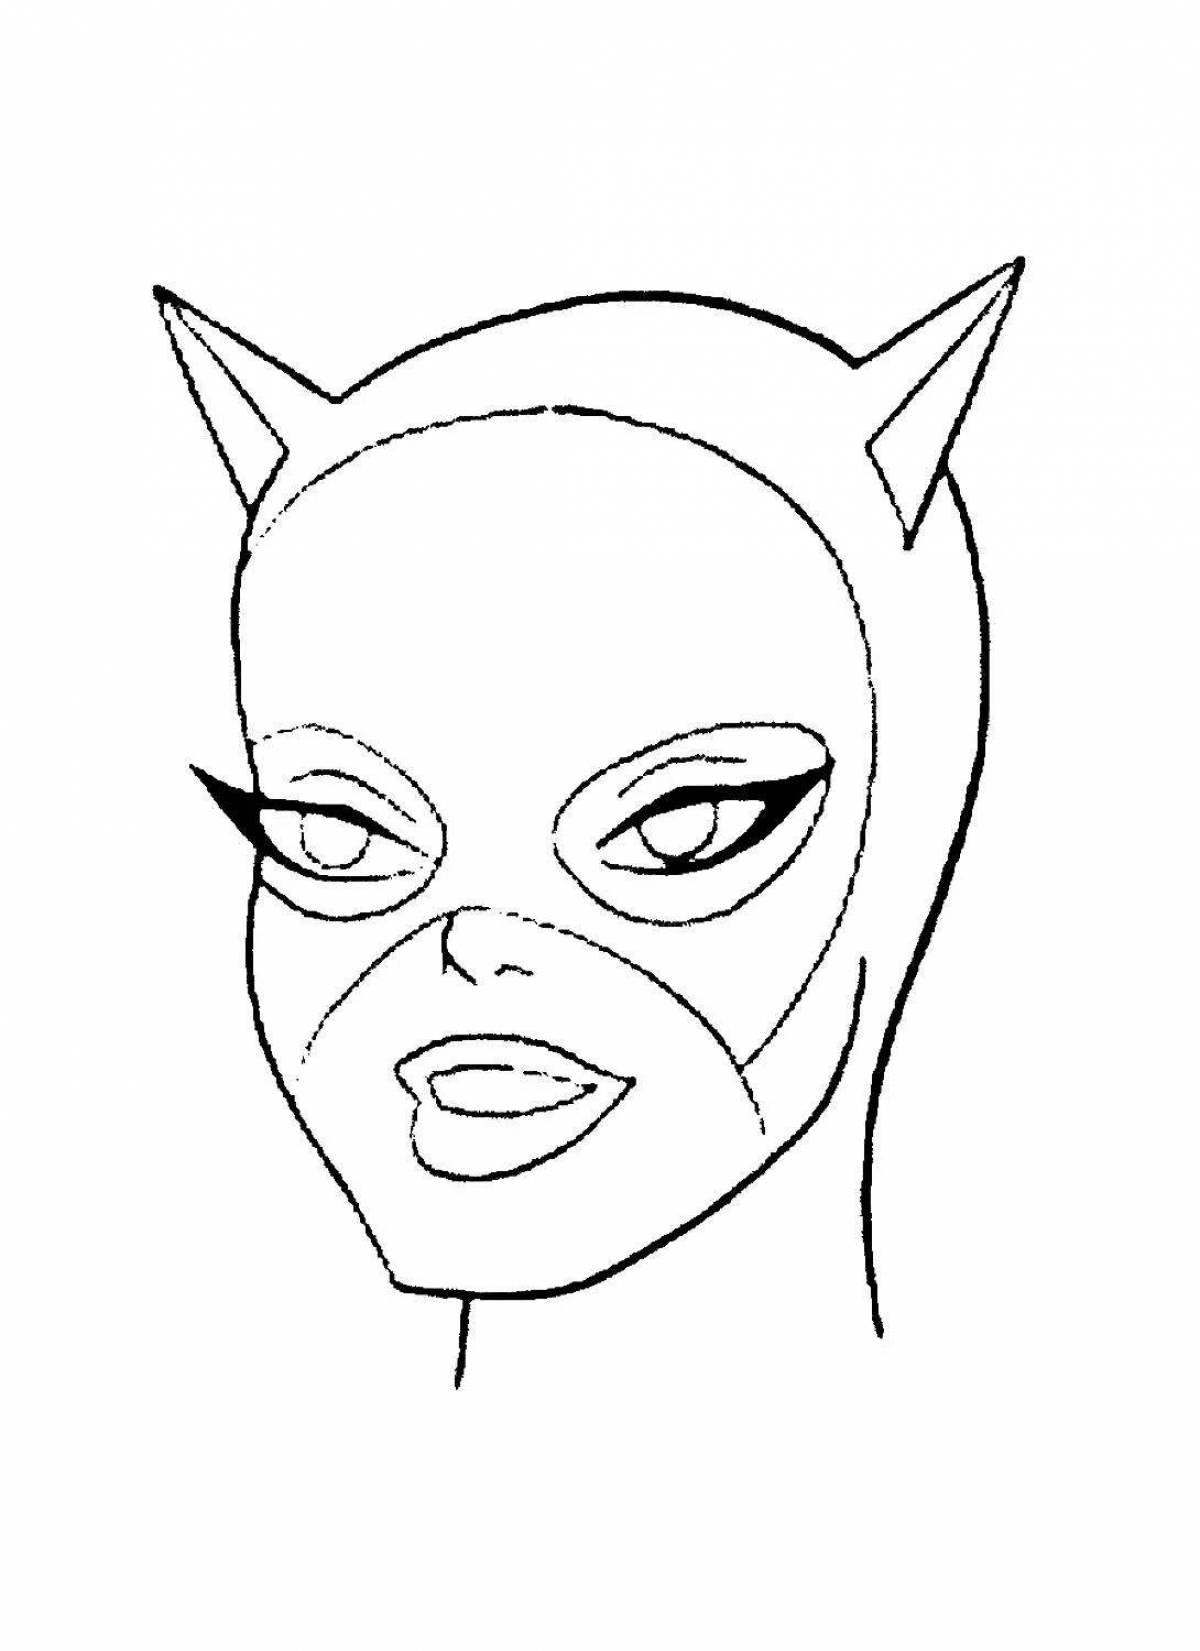 Awesome batman and catwoman coloring pages